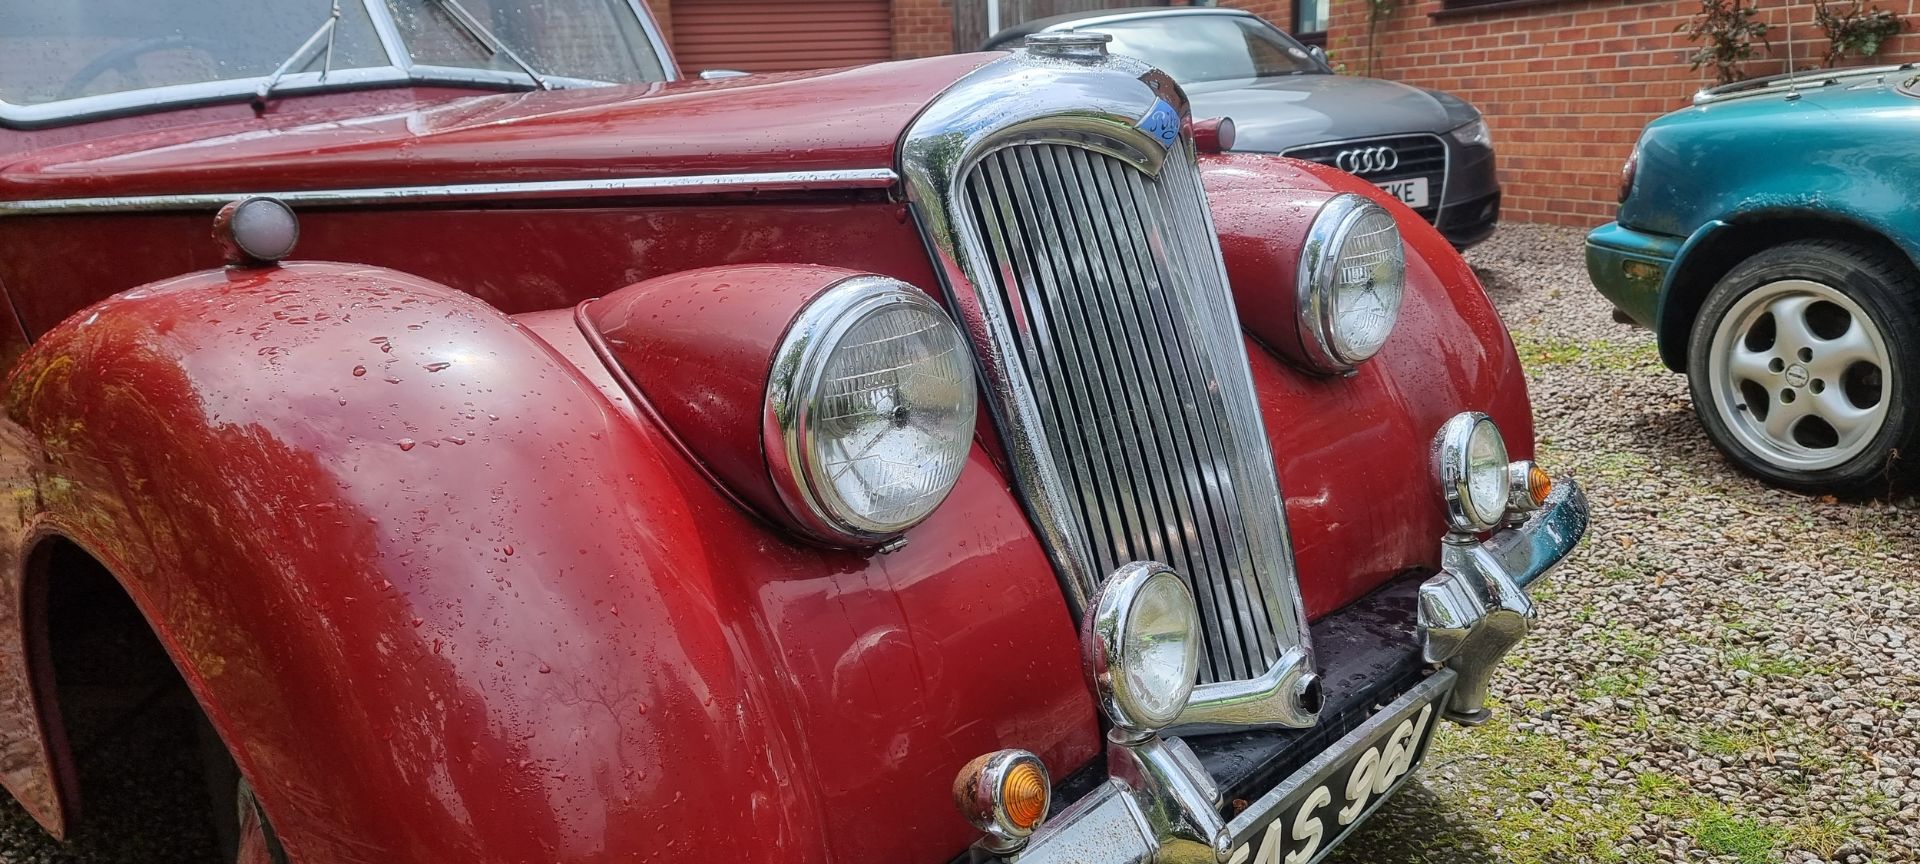 1951 Riley RMB, 2500cc. Registration number FAS 961. Chassis number 61S/8258. Engine number 6965. - Image 6 of 20